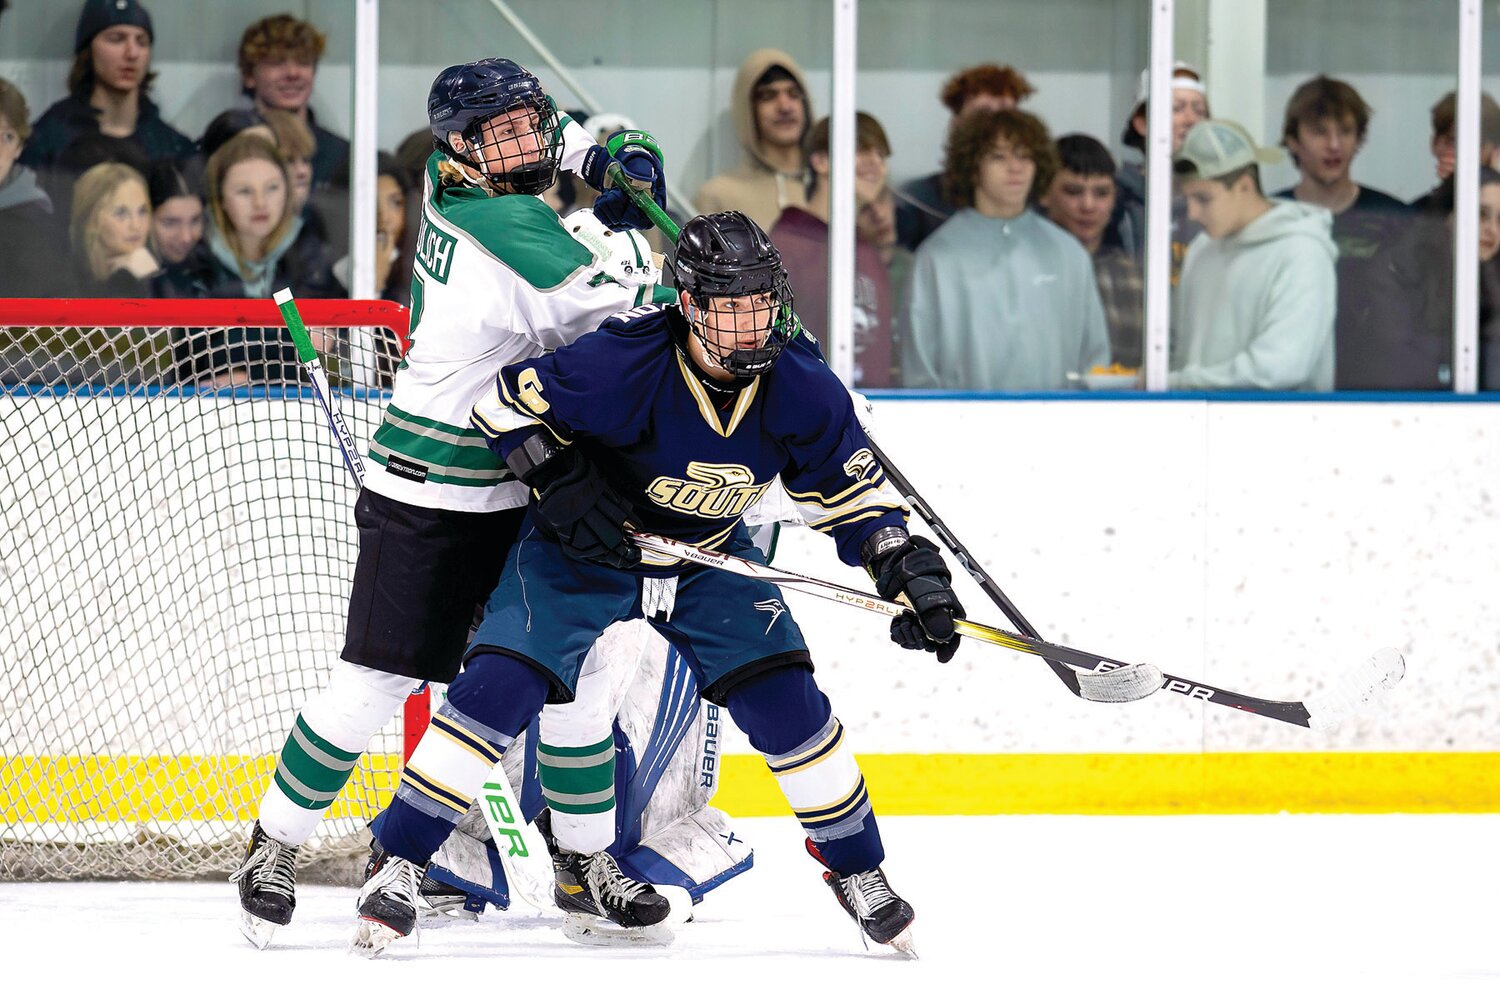 Pennridge’s John Mikulich tries to clear the front of the goal as Council Rock South’s Gavin Nisenzon puts on the pressure during the Suburban High School Hockey League final last Thursday.